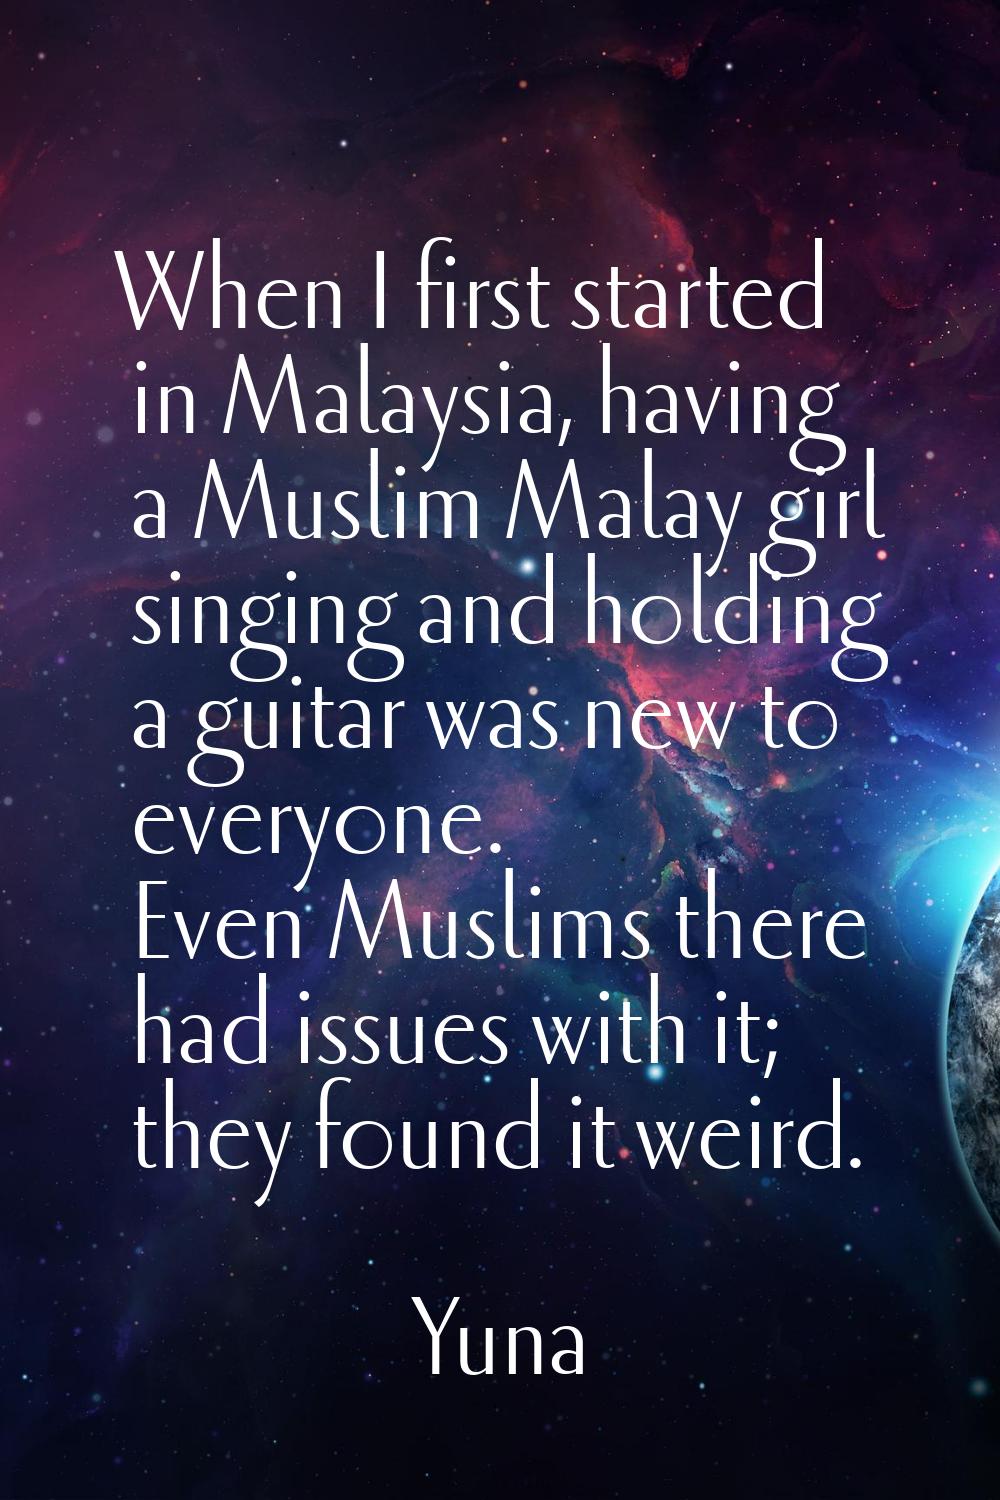 When I first started in Malaysia, having a Muslim Malay girl singing and holding a guitar was new t